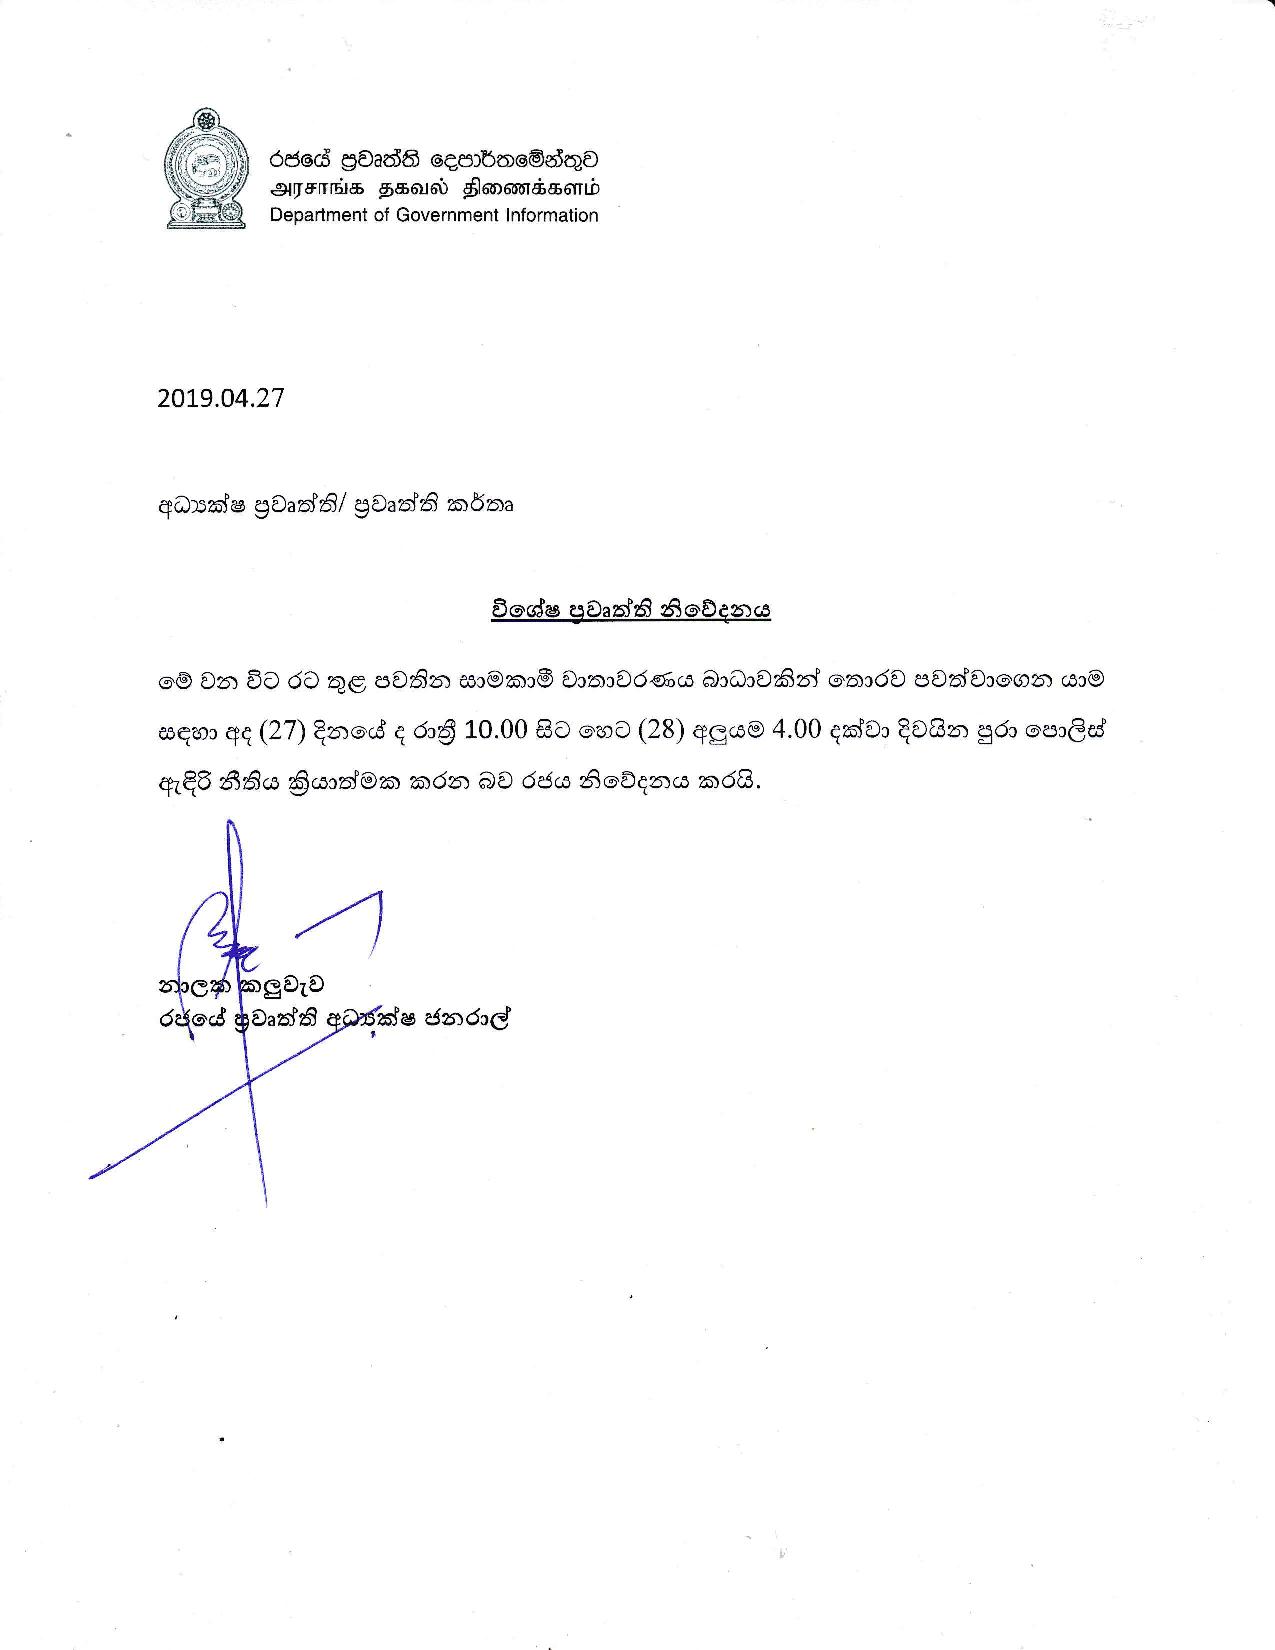 Special Media Release on 27.04.2019 Curfew page 001